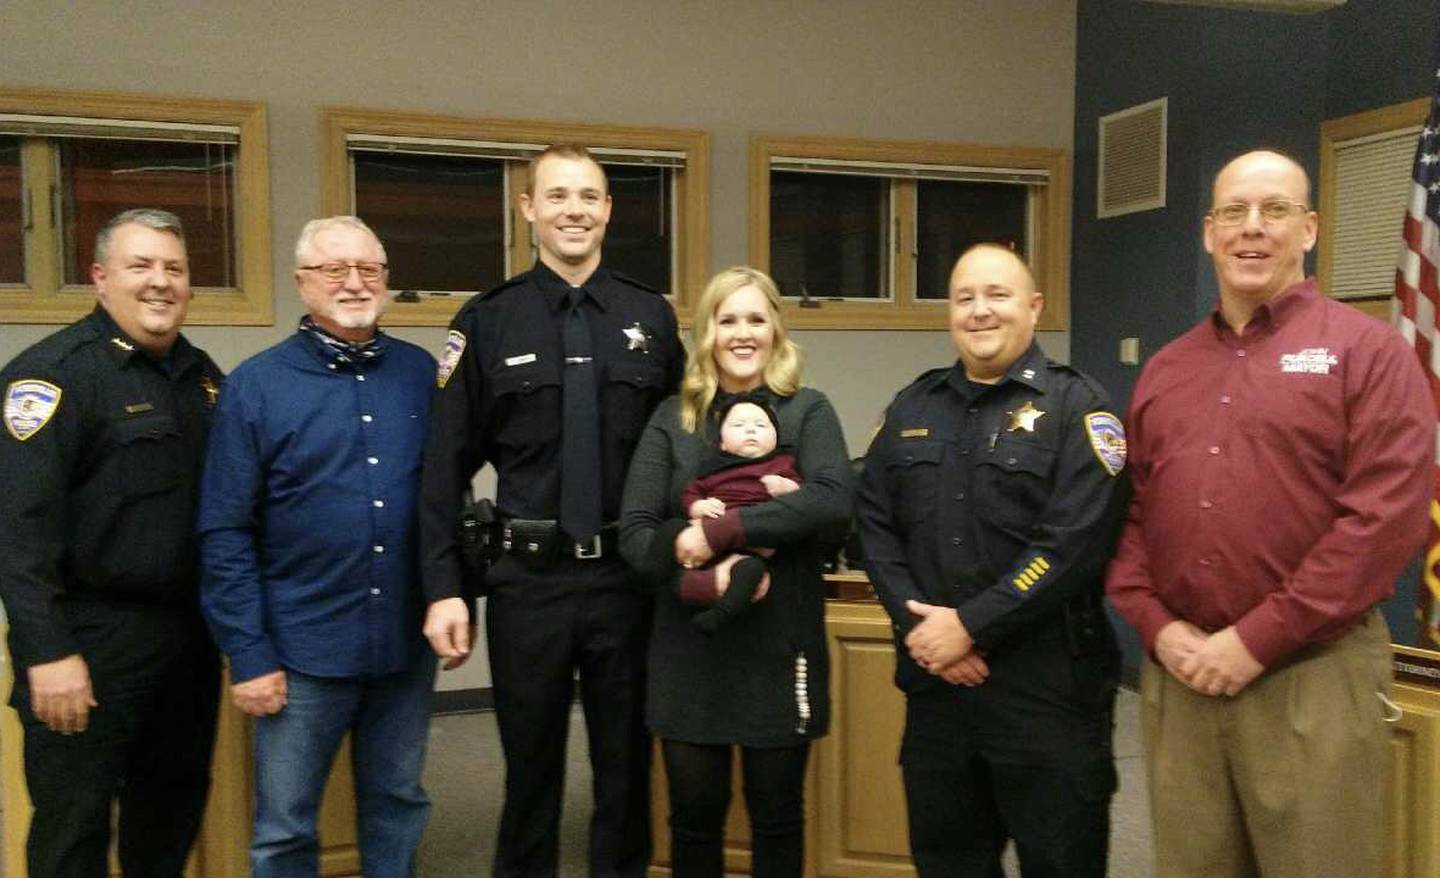 Pausing for a photo after the swearing-in ceremony of Yorkville police patrol Officer Tyler Lobdell are, from left, police Chief Jim Jensen, Yorkville Board of Fire and Police Commissioners Chairman Robert Johnson, Officer Lobdell, wife Mallory and baby Monroe, Deputy Chief Ray Mikolasek and Mayor John Purcell. (Mark Foster - mfoster@shawmediacom)